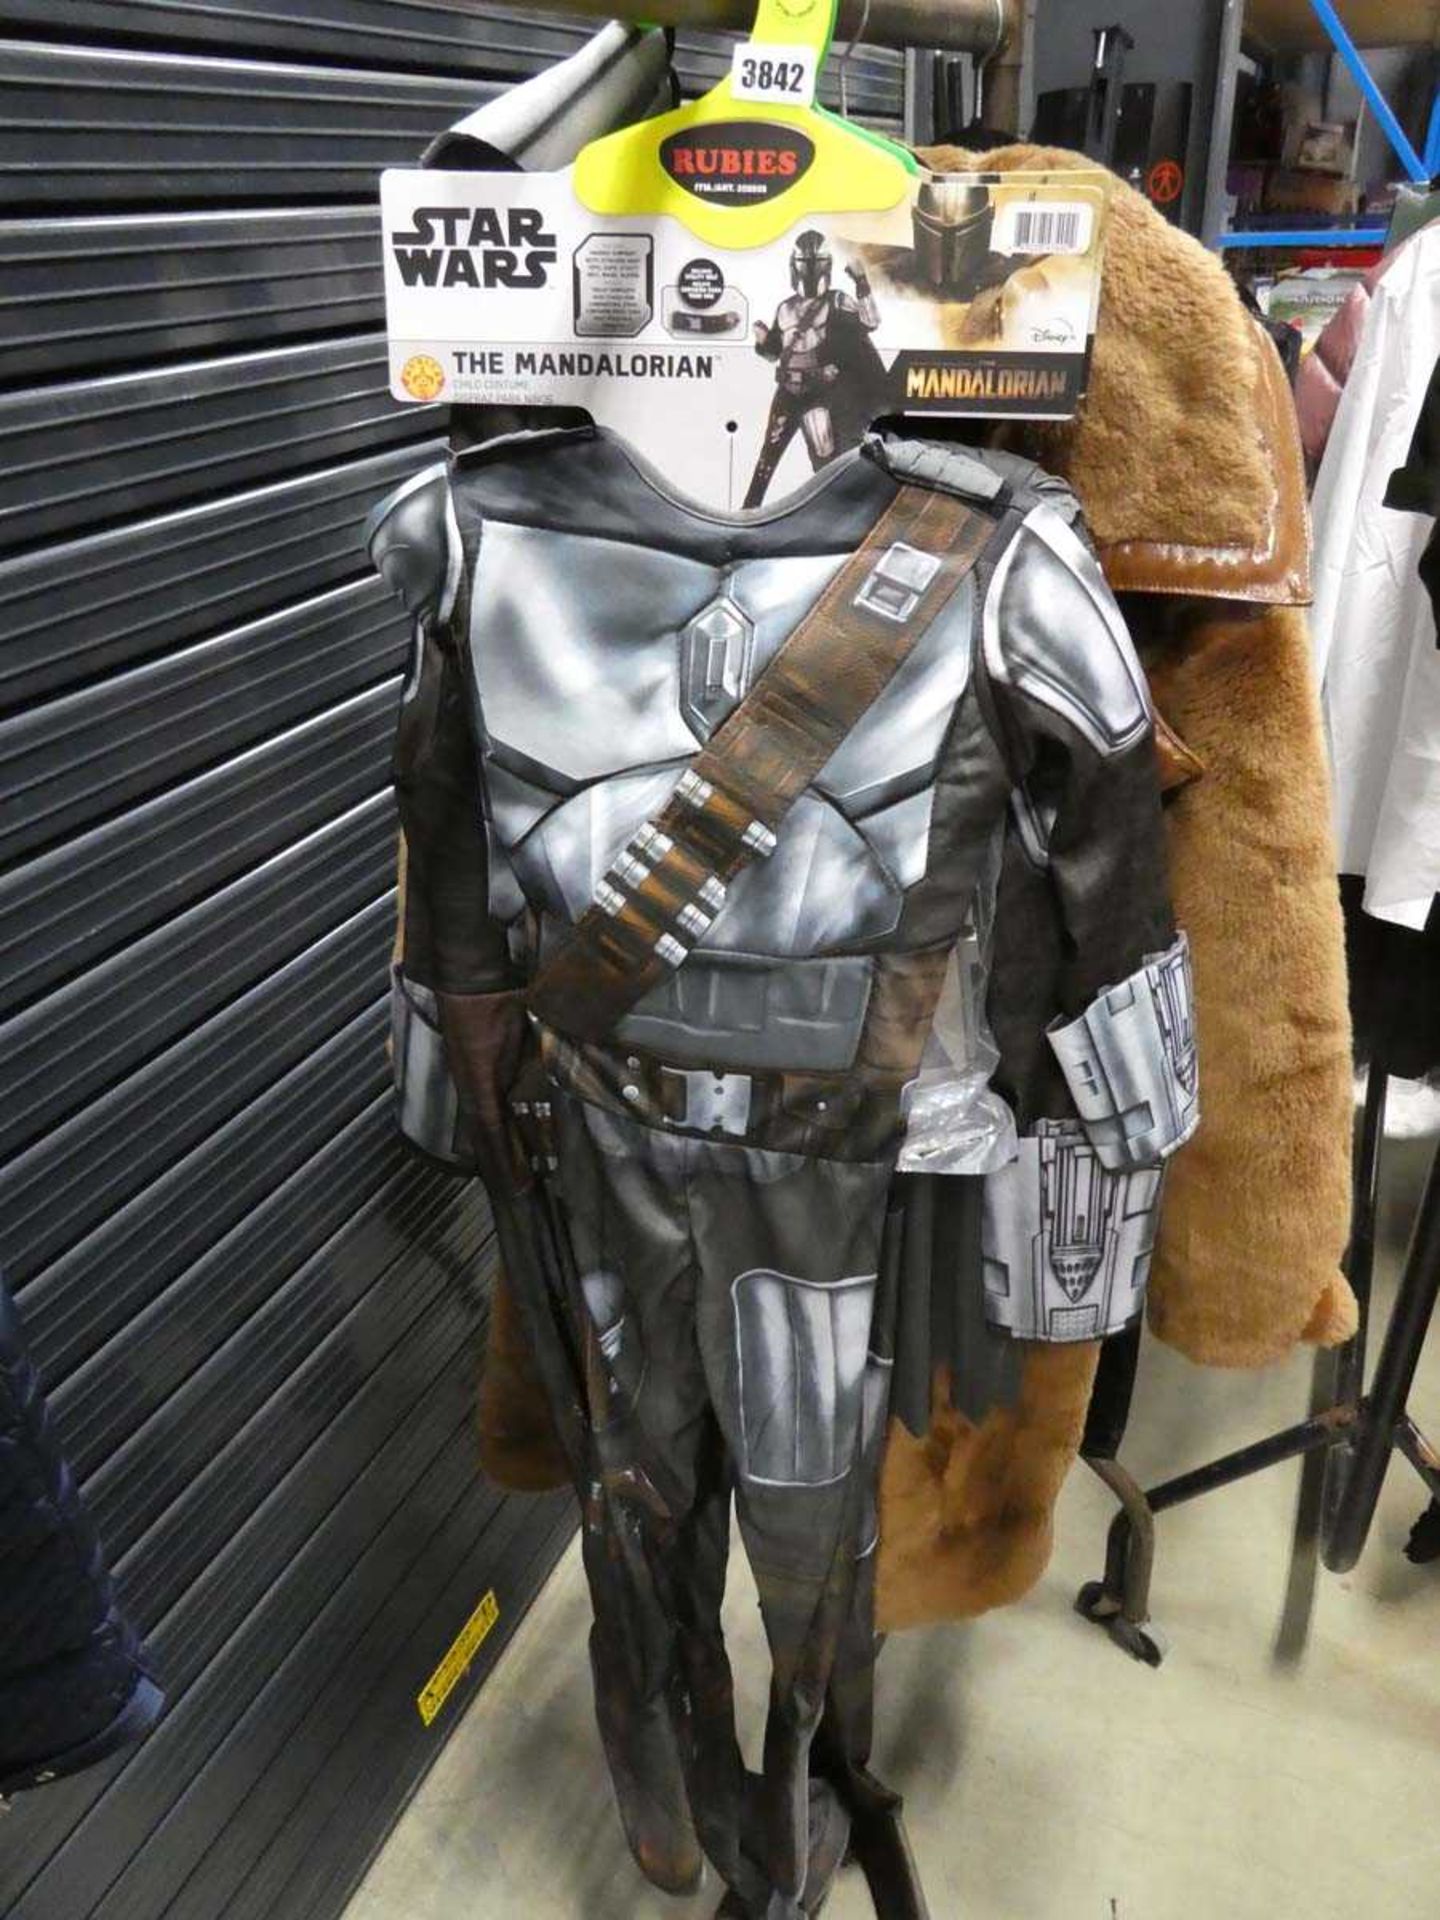 2 Star Wars The Mandalorian children's dressing up outfits